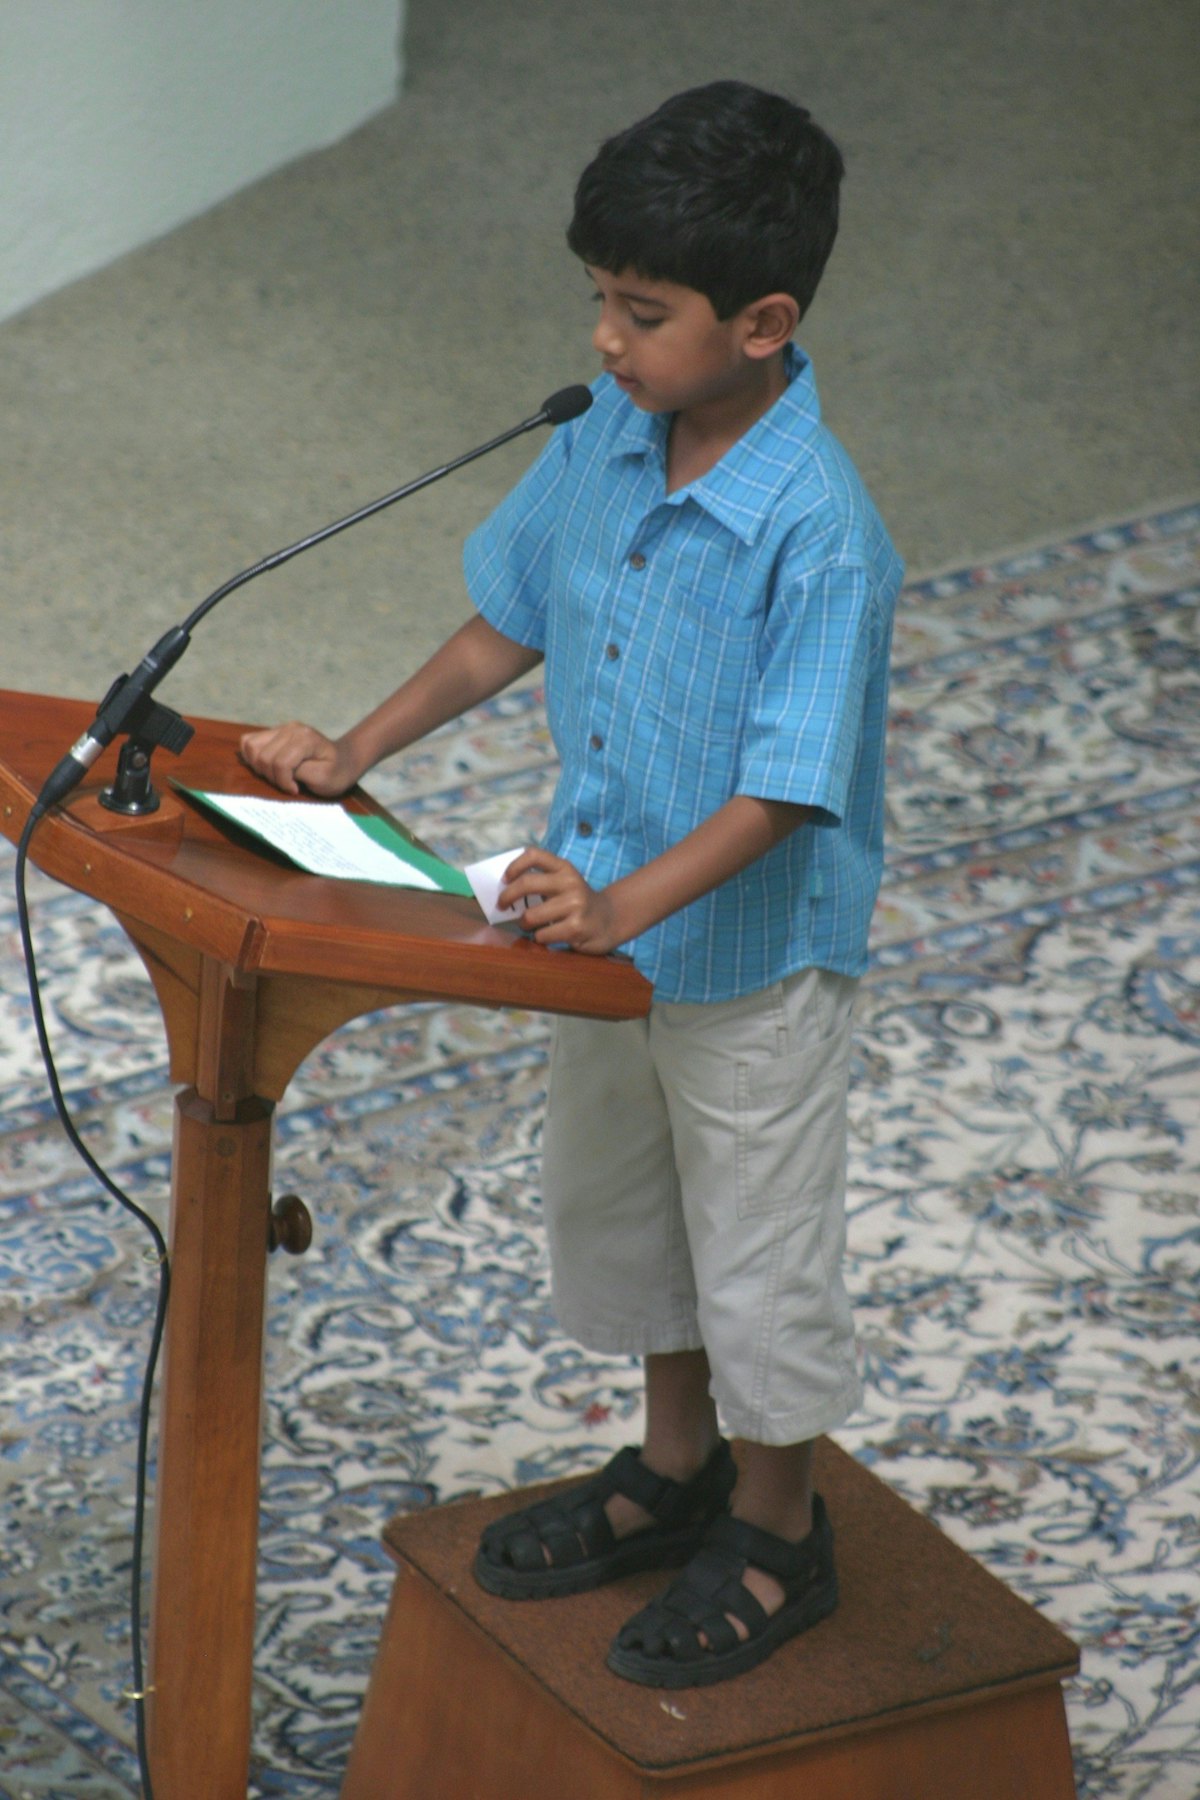 Varun Rao reads a prayer at the children's service at the Baha'i House of Worship in Sydney.